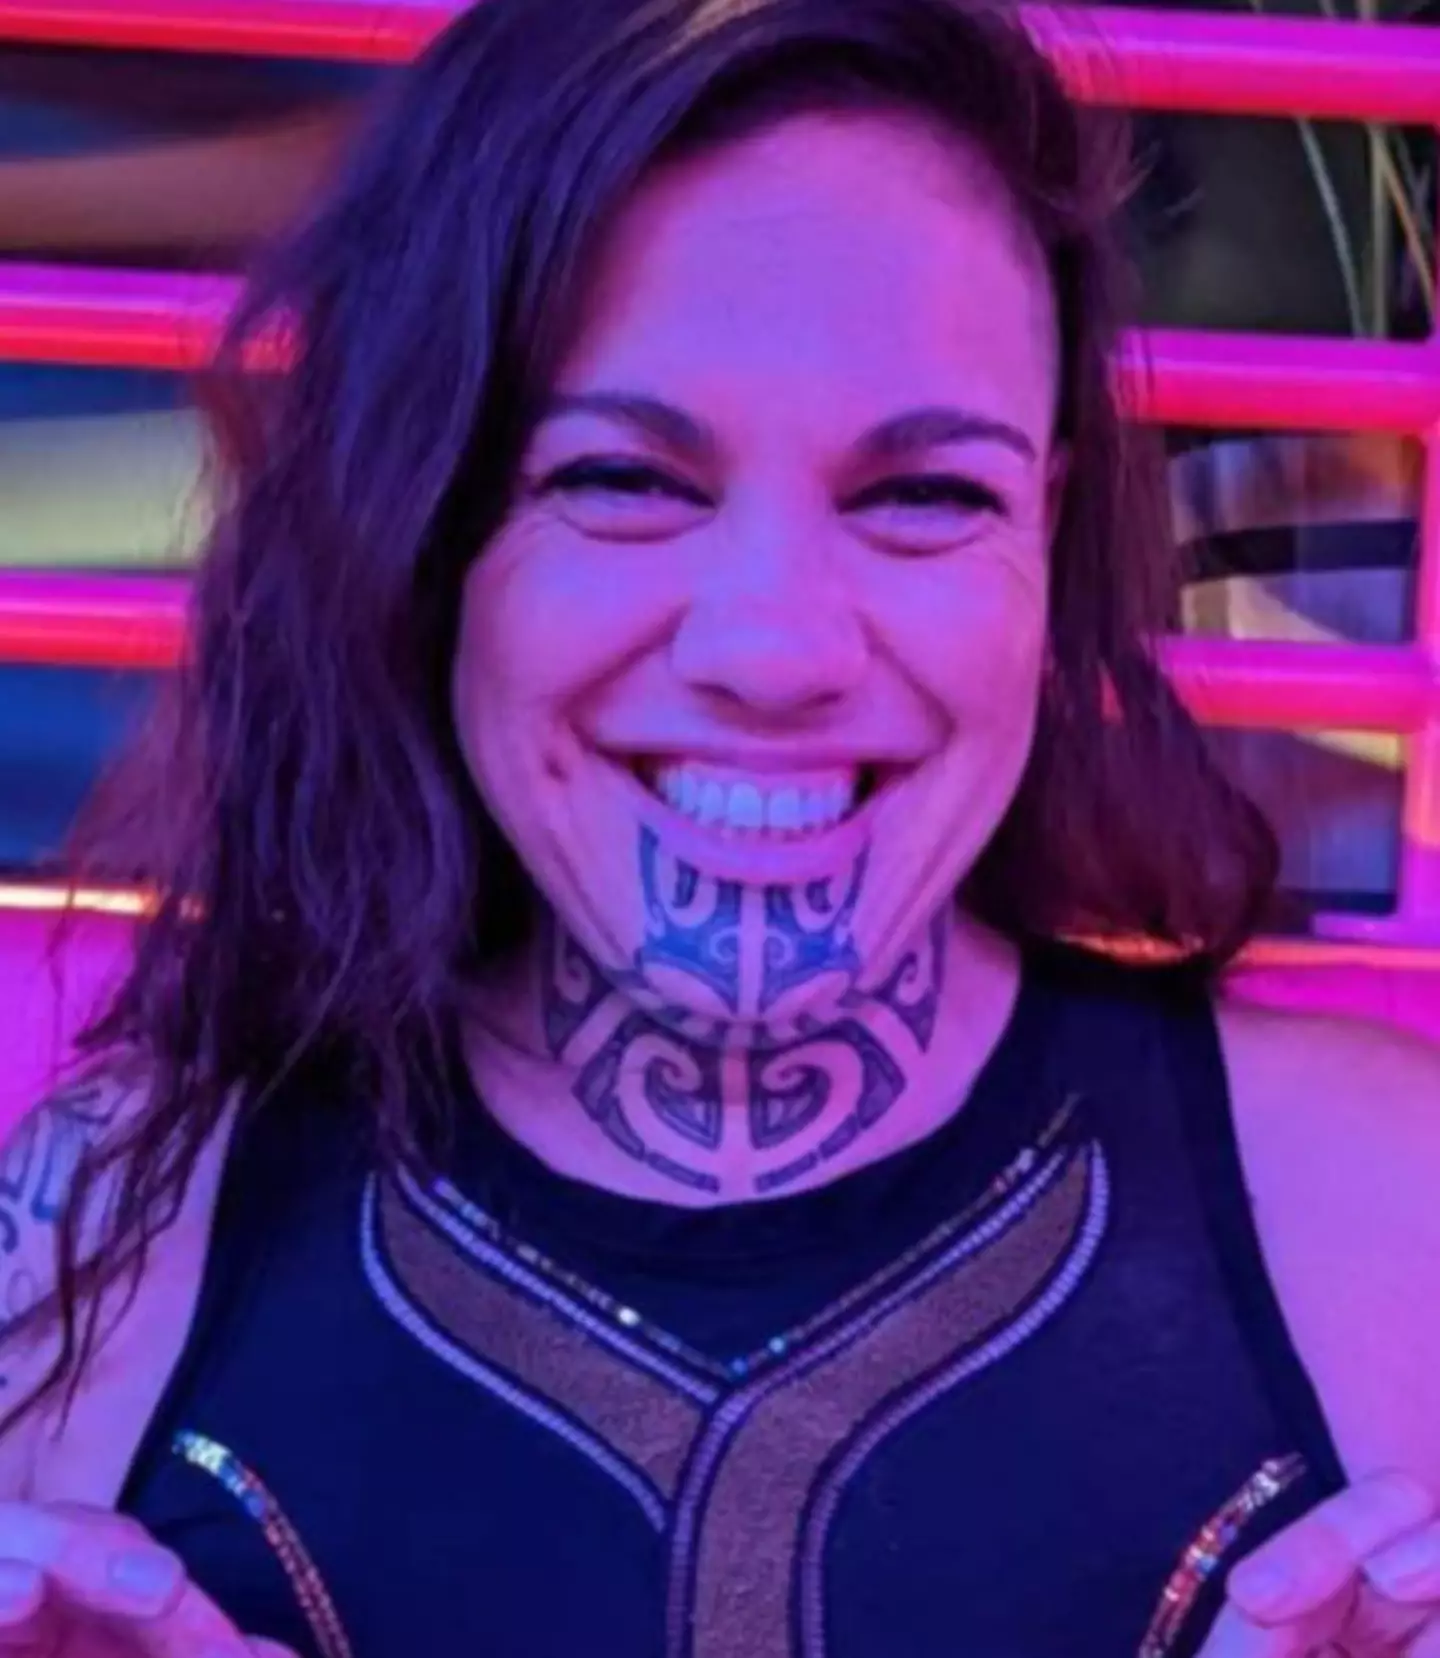 A woman has been refused entry to a bar because of her cultural tattoos.